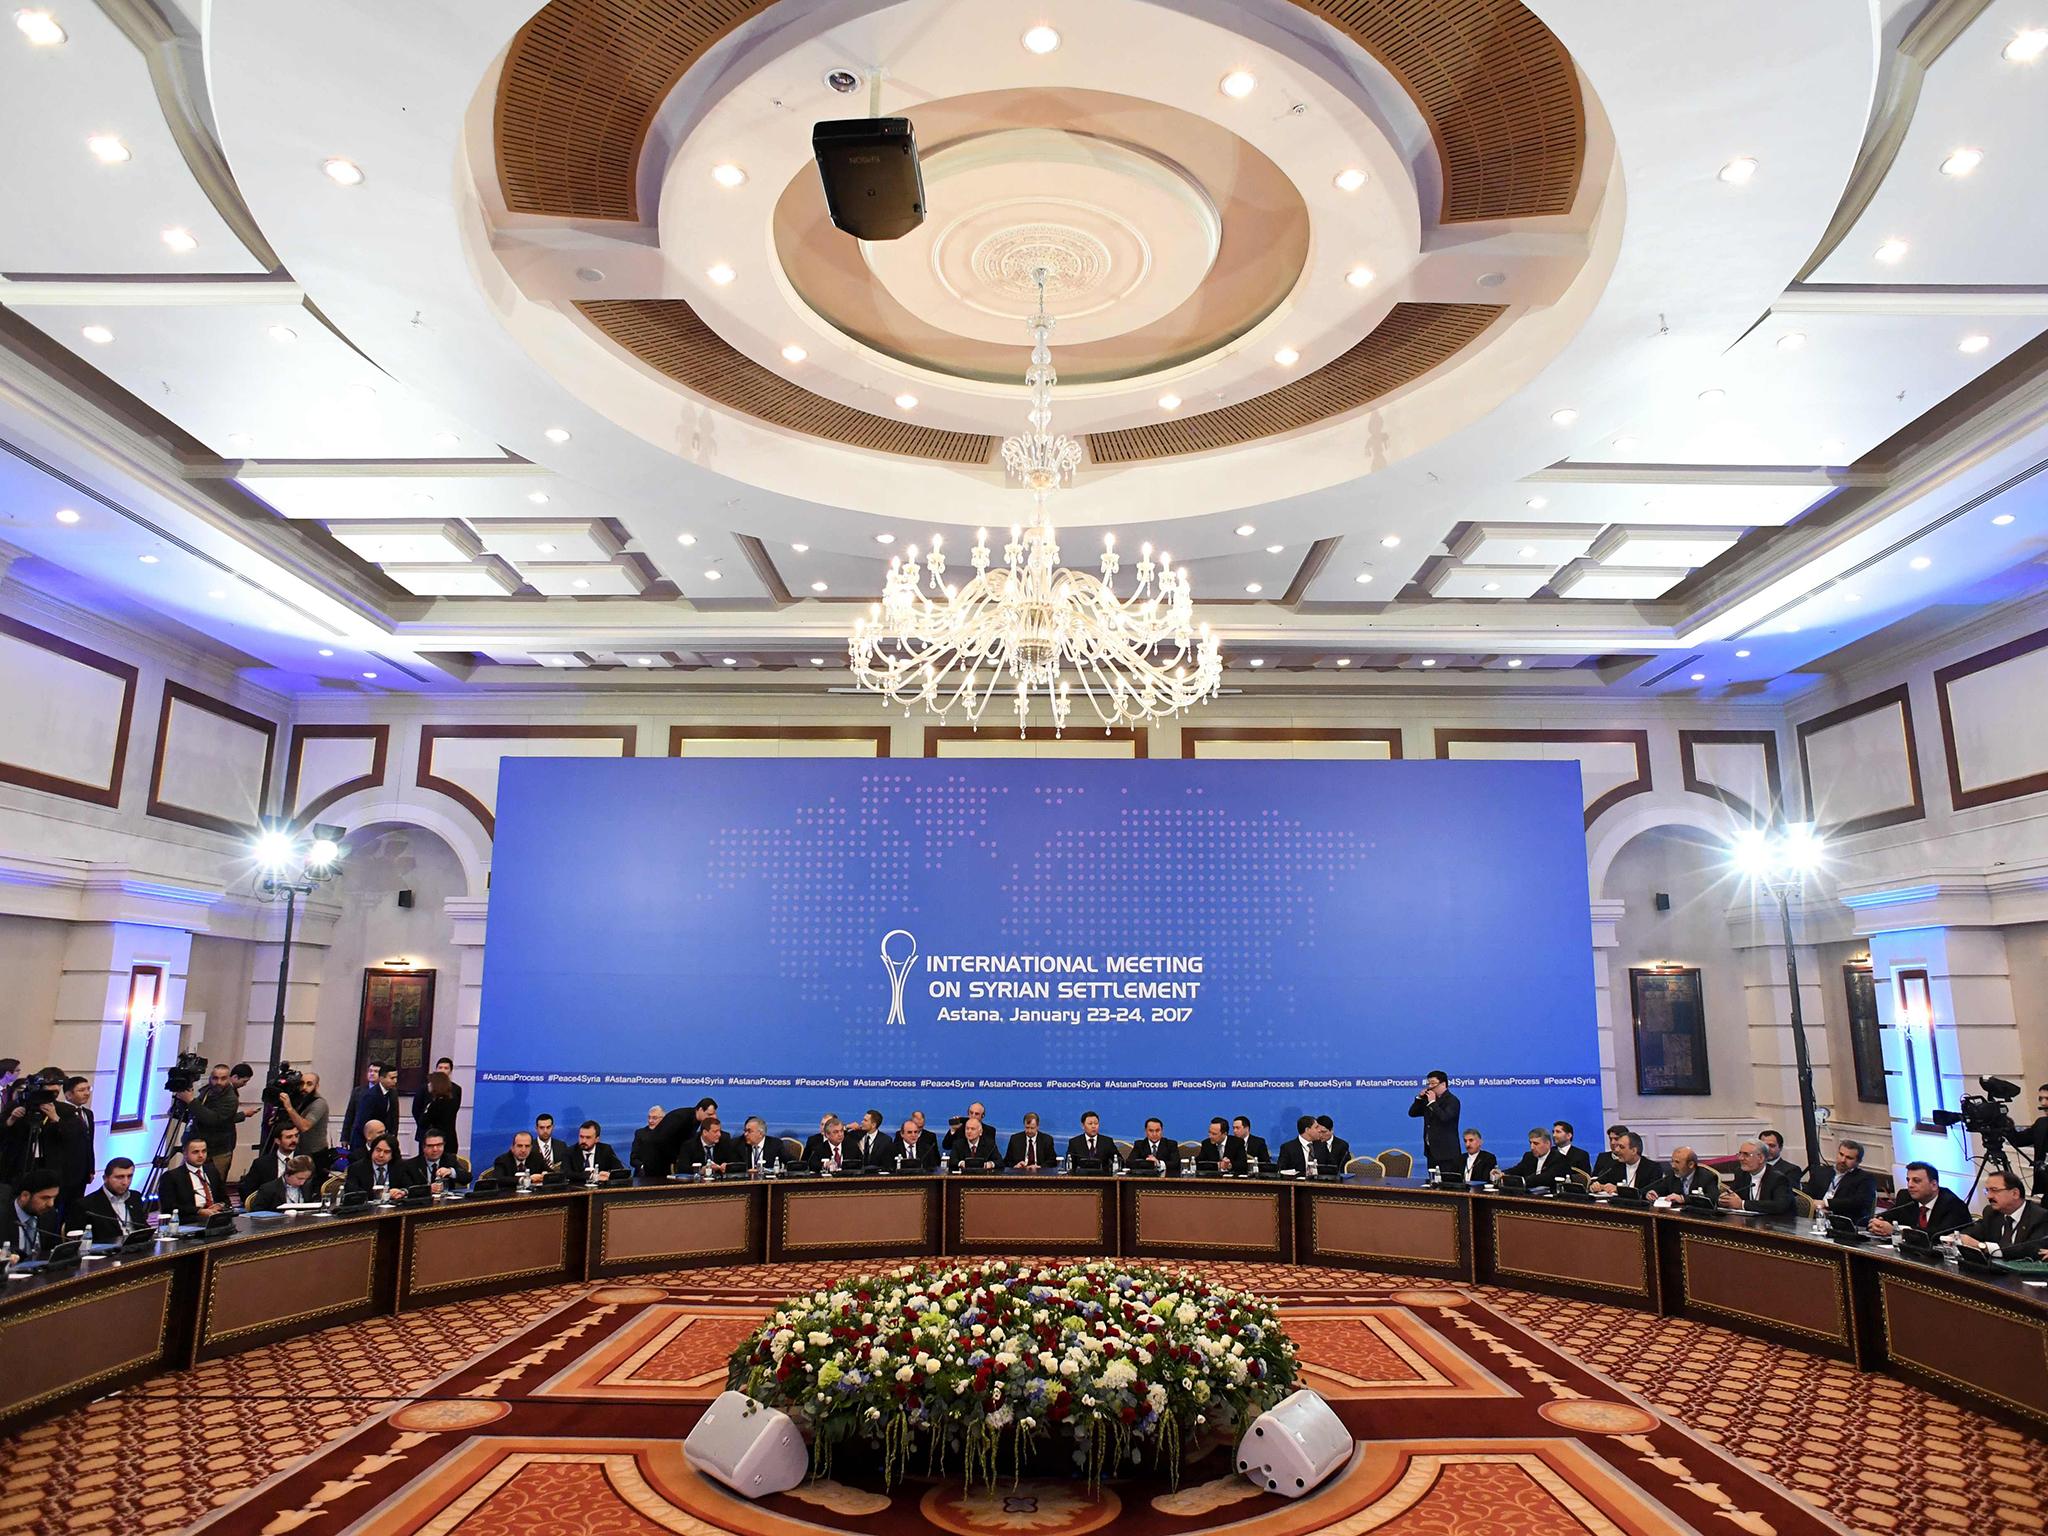 Representatives of the Syria regime and rebel groups along with other attendees take part in the first session of Syria peace talks at Astana's Rixos President Hotel